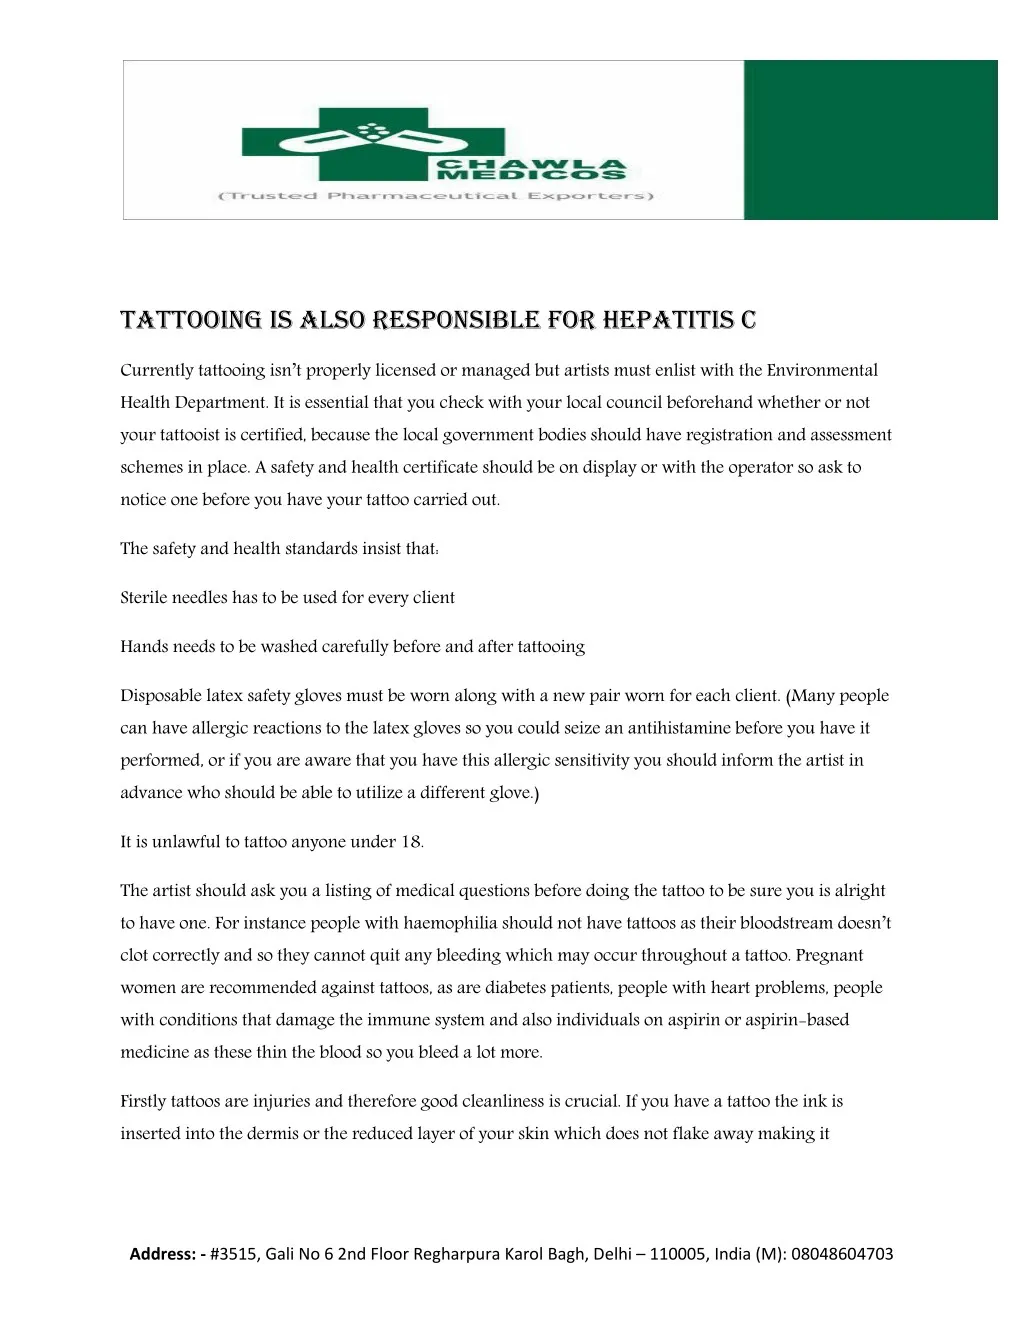 tattooing is also responsible for hepatitis c